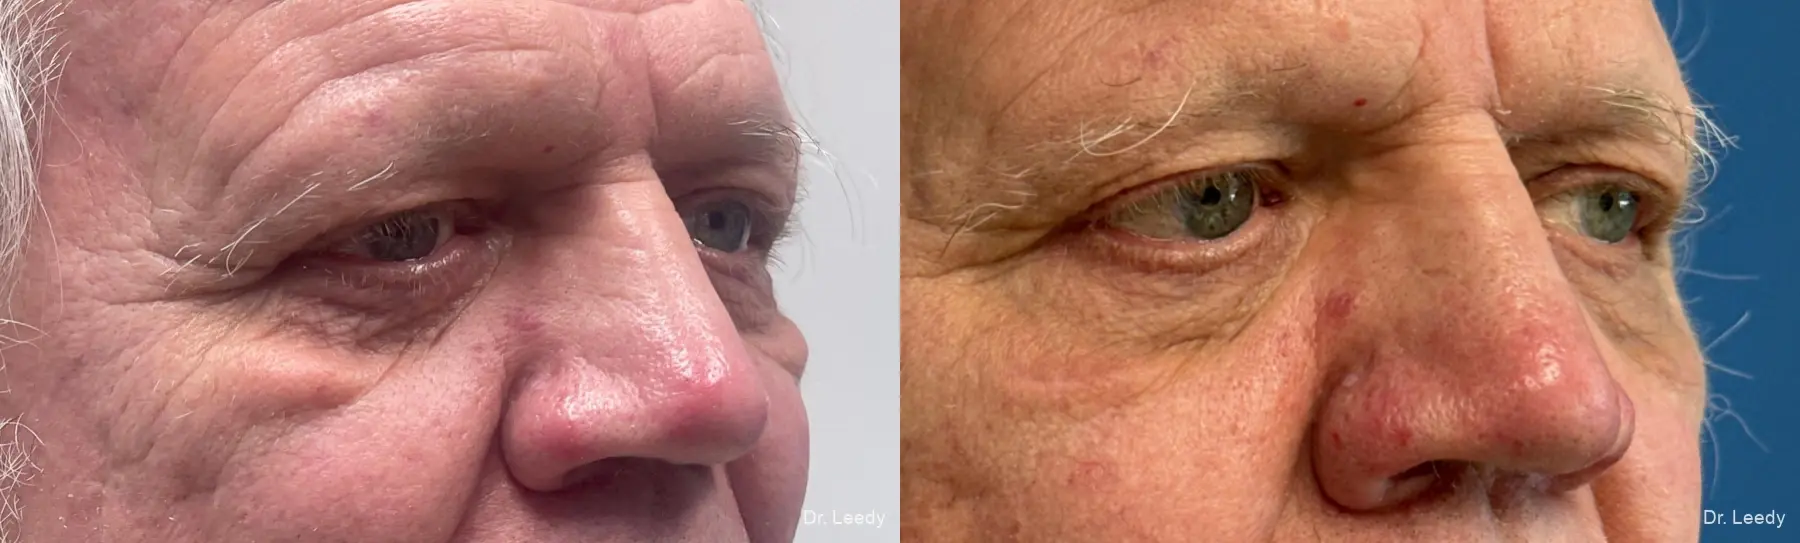 Lower-blepharoplasty-for-men: Patient 2 - Before and After  